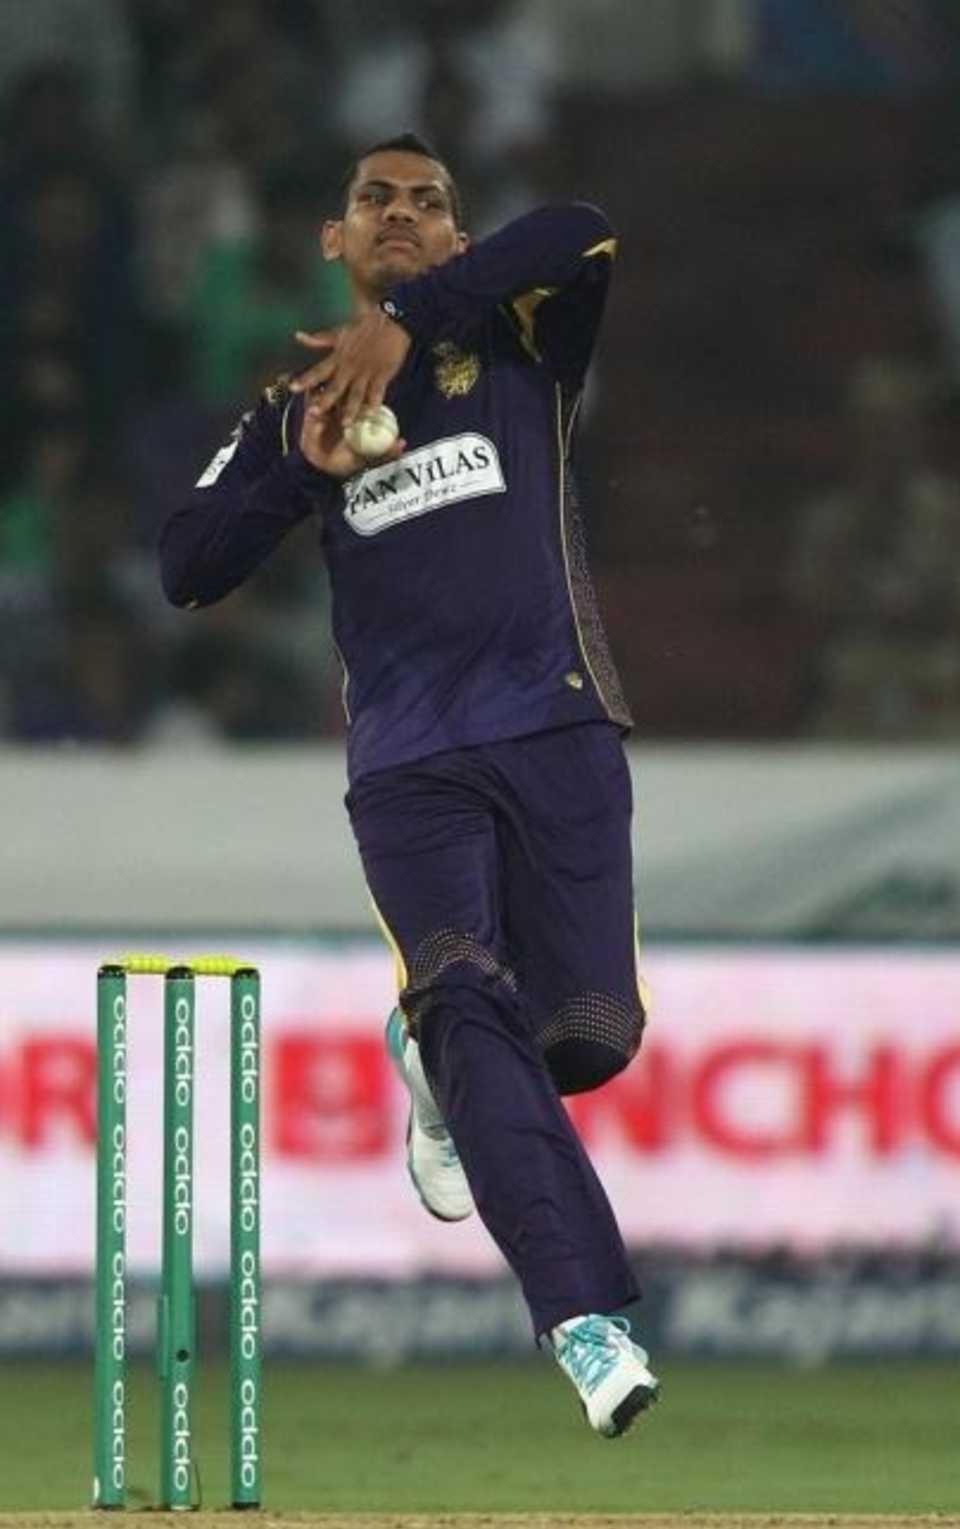 Sunil Narine approaches the crease during his spell, Dolphins v Kolkata Knight Riders, Champions League T20, Group A, Hyderabad, September 29, 2014